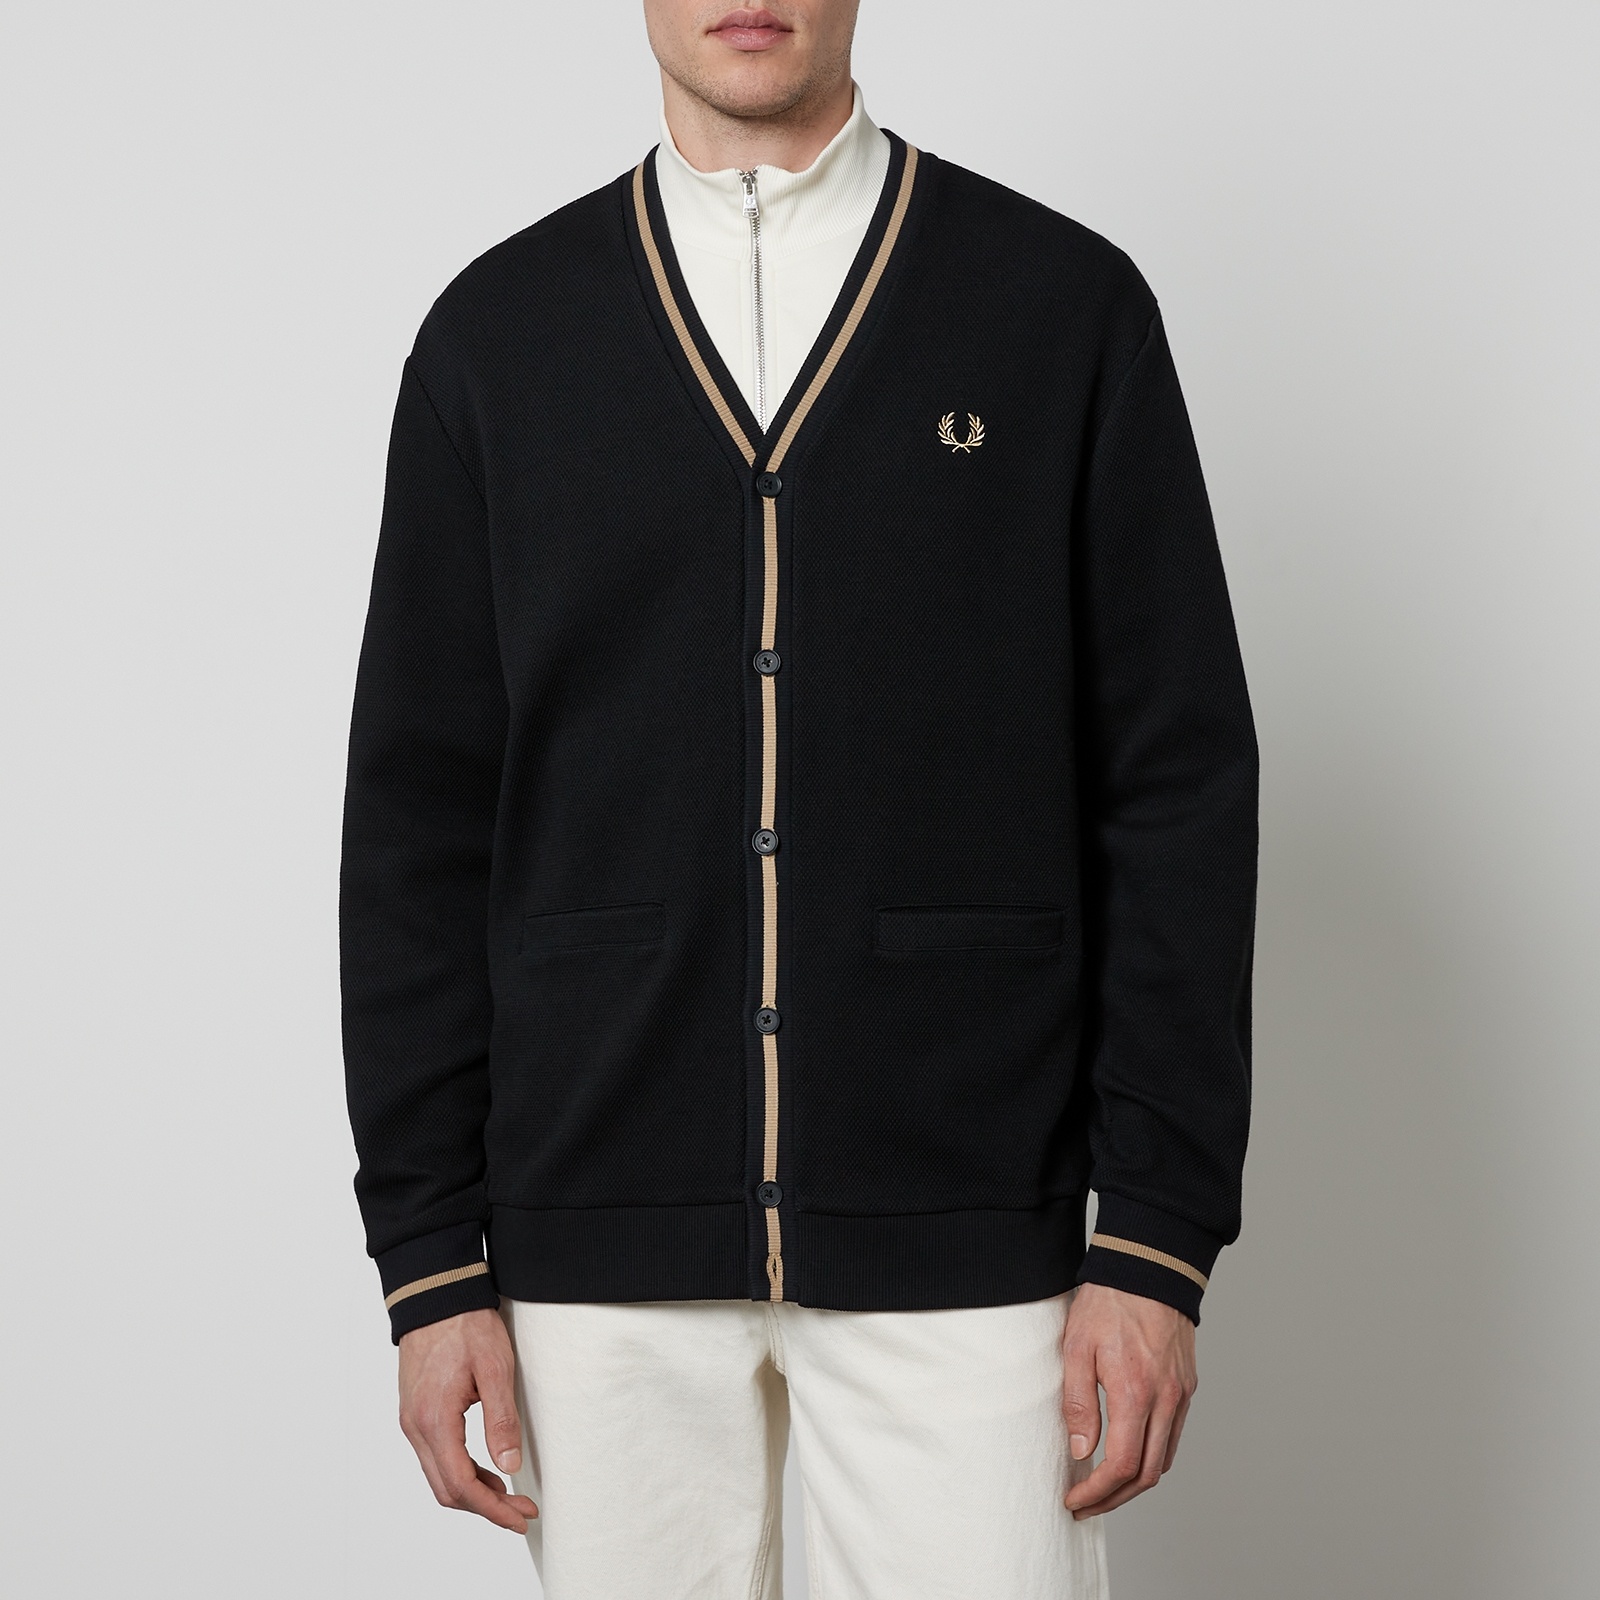 Fred Perry Men's Tipped Pique Cardigan - Black/Warm Stone - 1